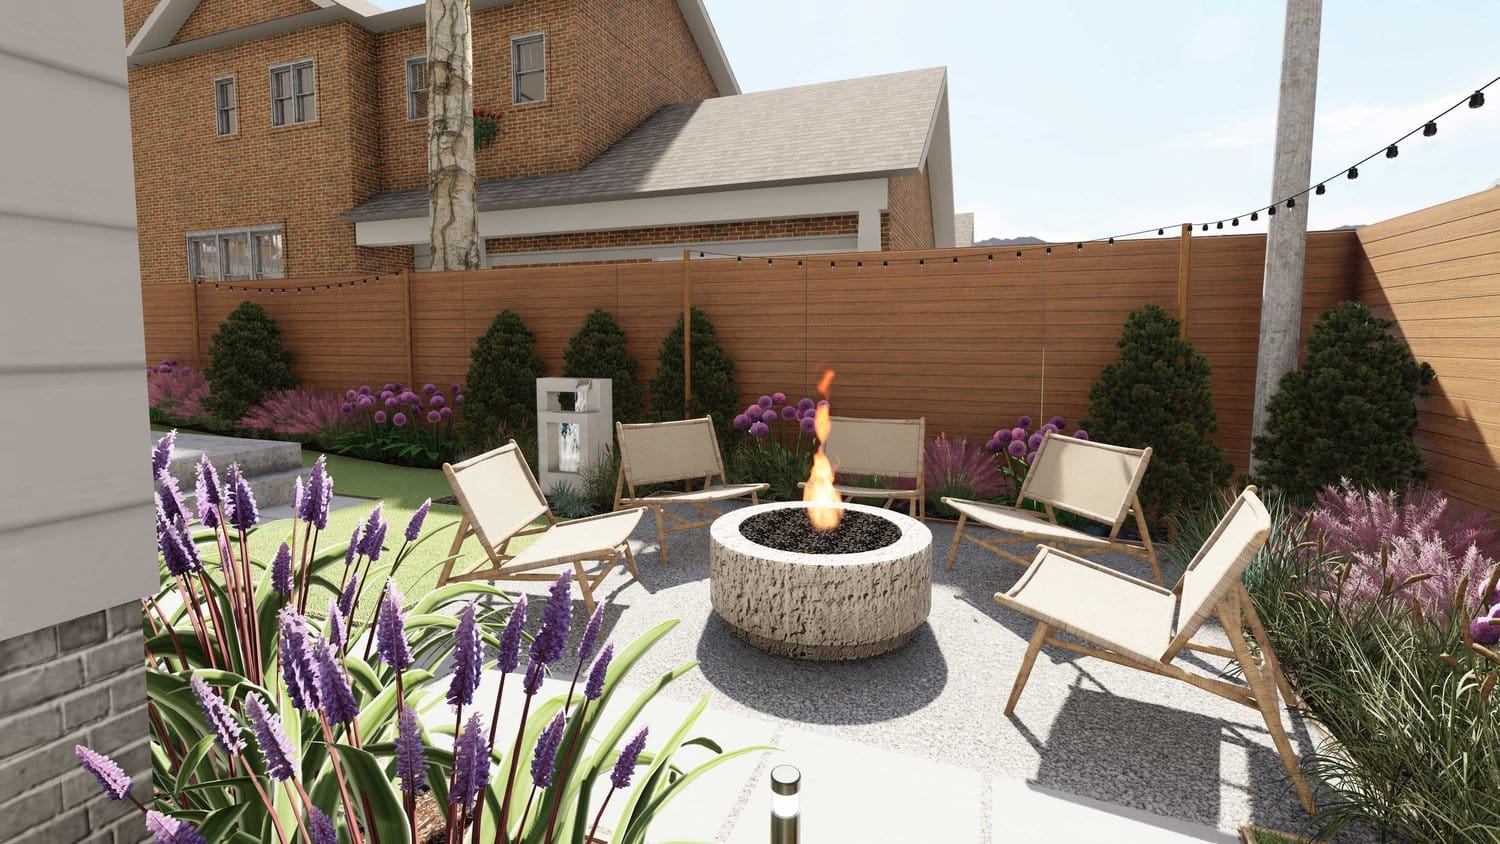 Arlington side yard with concrete patio fire pit seating area with set of relax chair and flowers